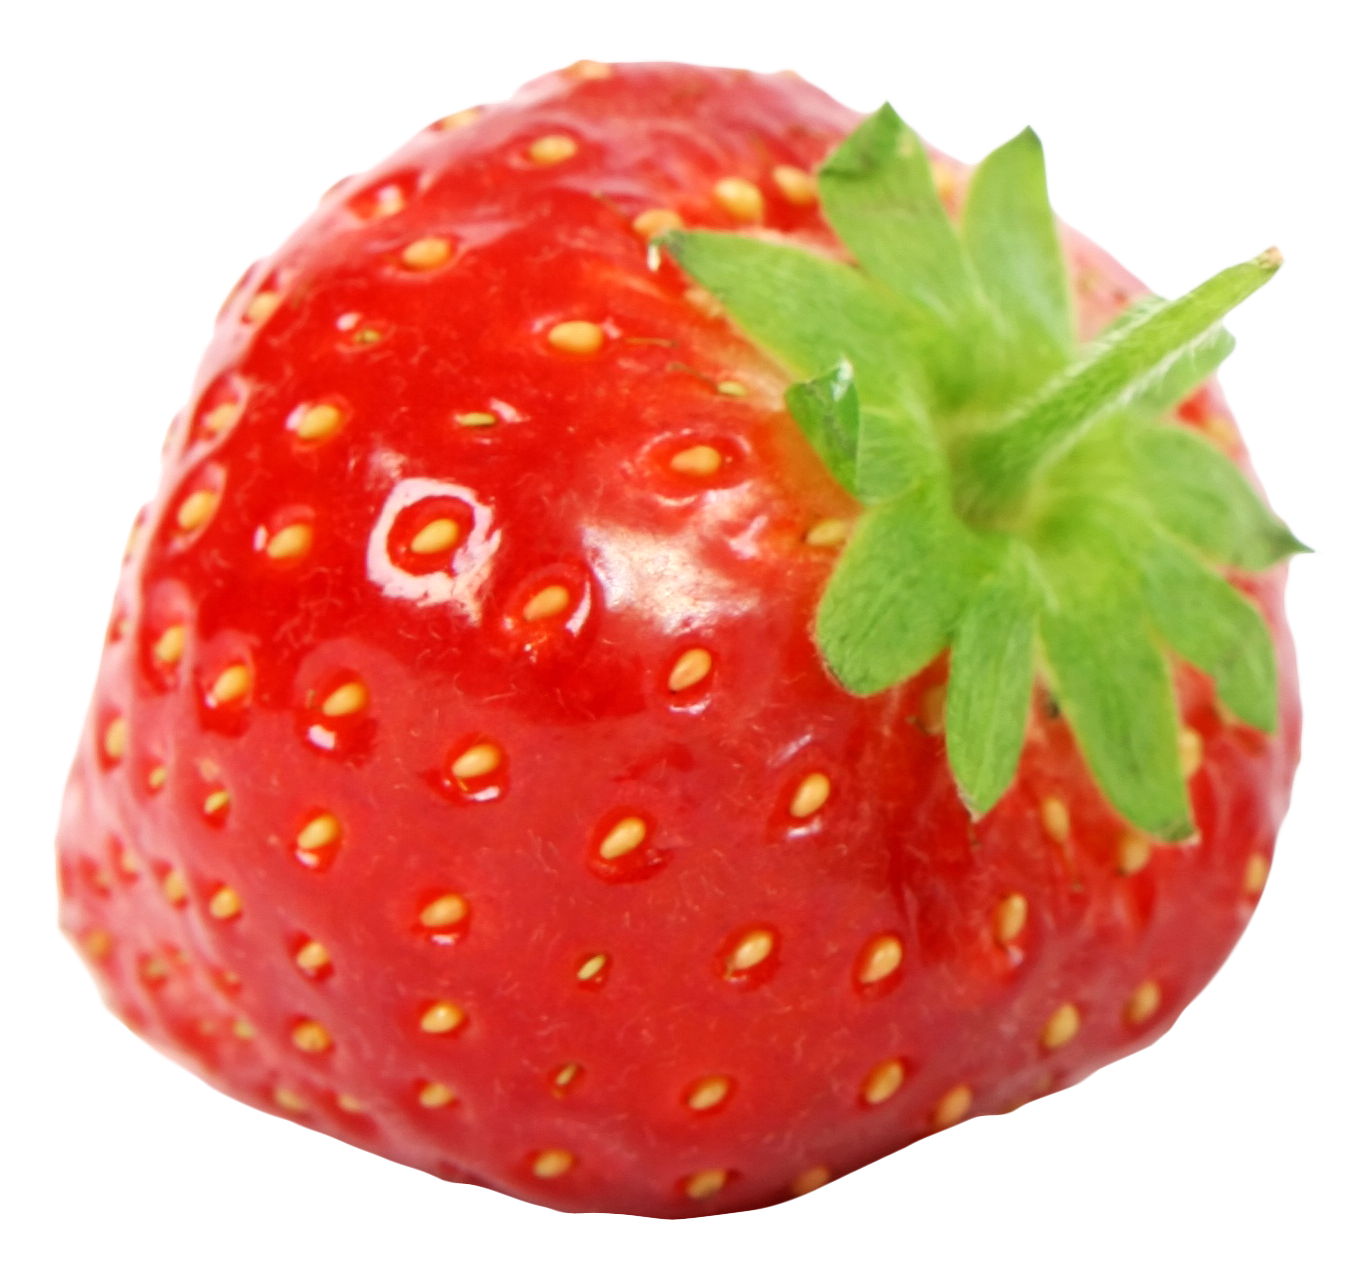 Png image purepng free. Strawberries clipart red strawberry